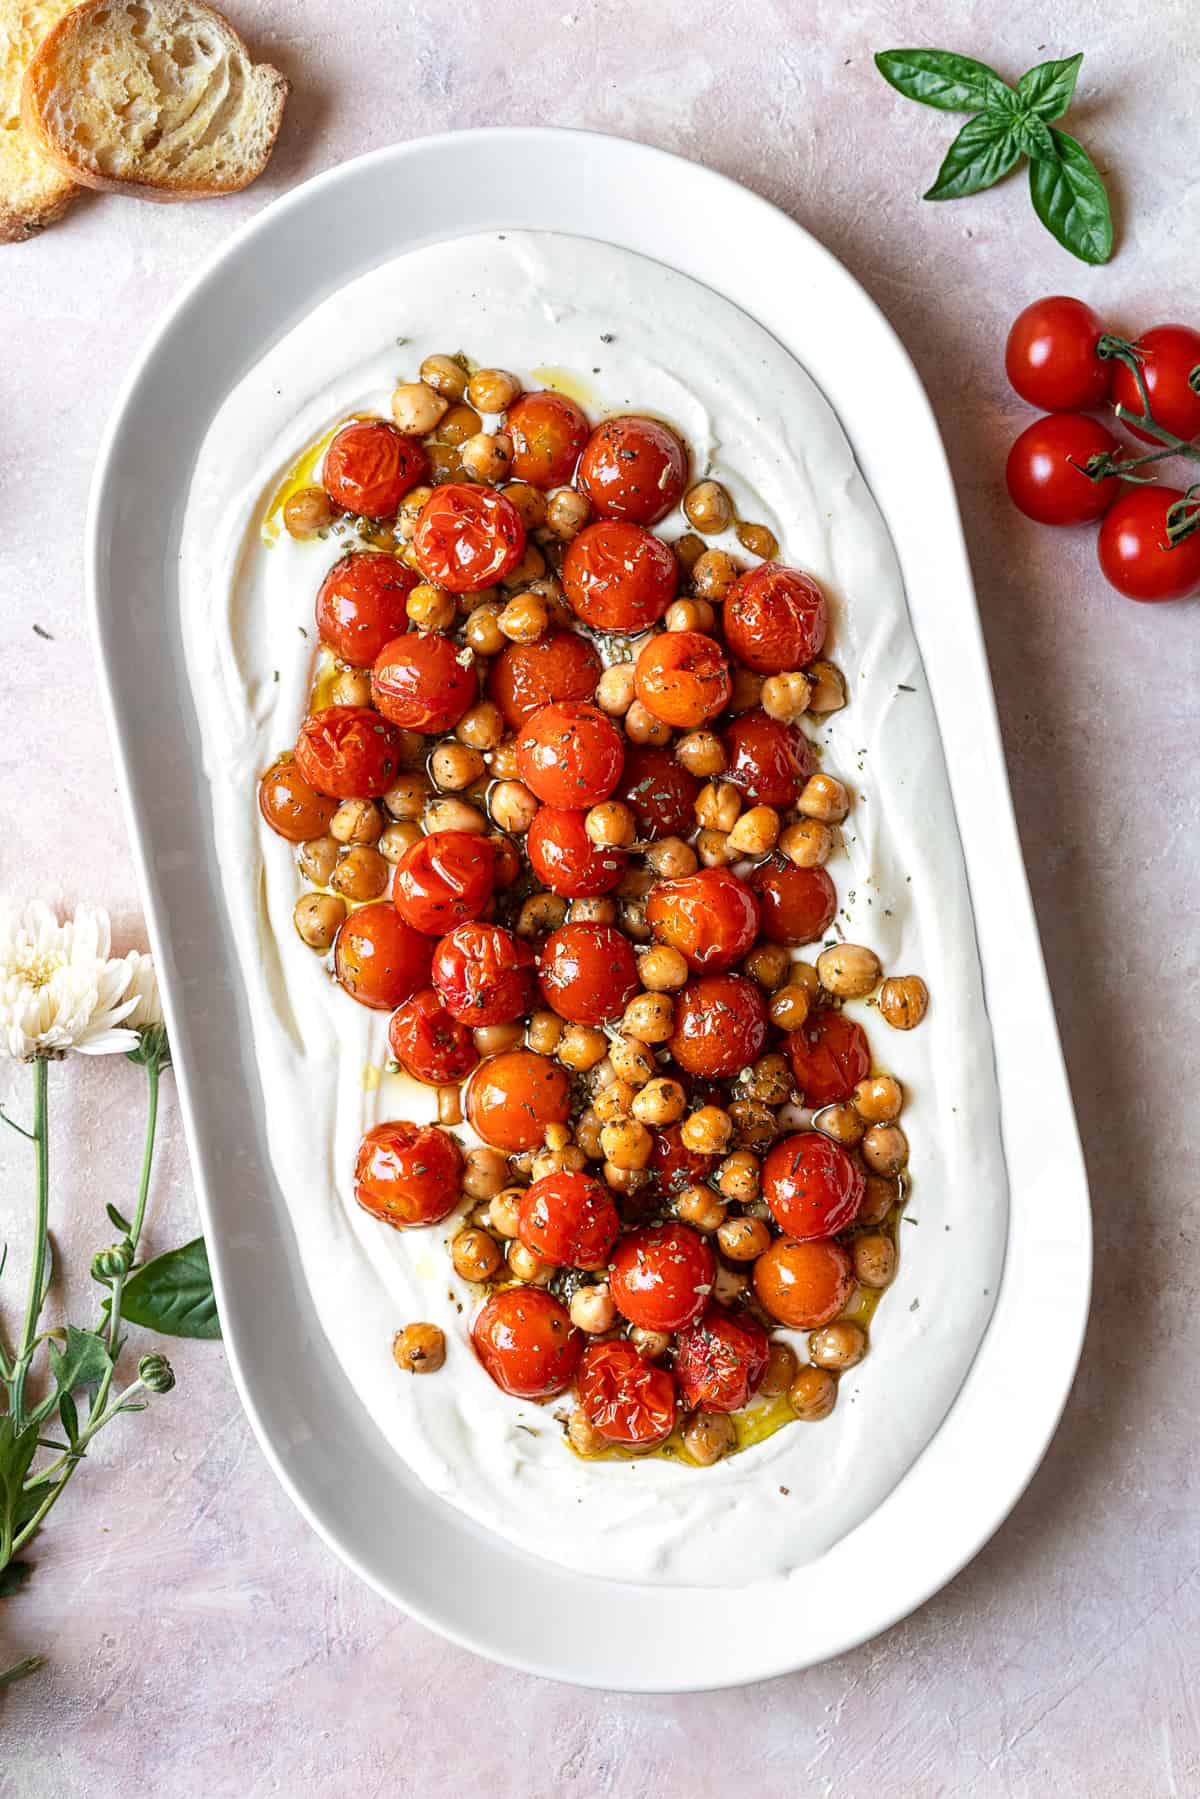 Creamy Whipped Feta Dip with Roasted Tomatoes and Chickpeas